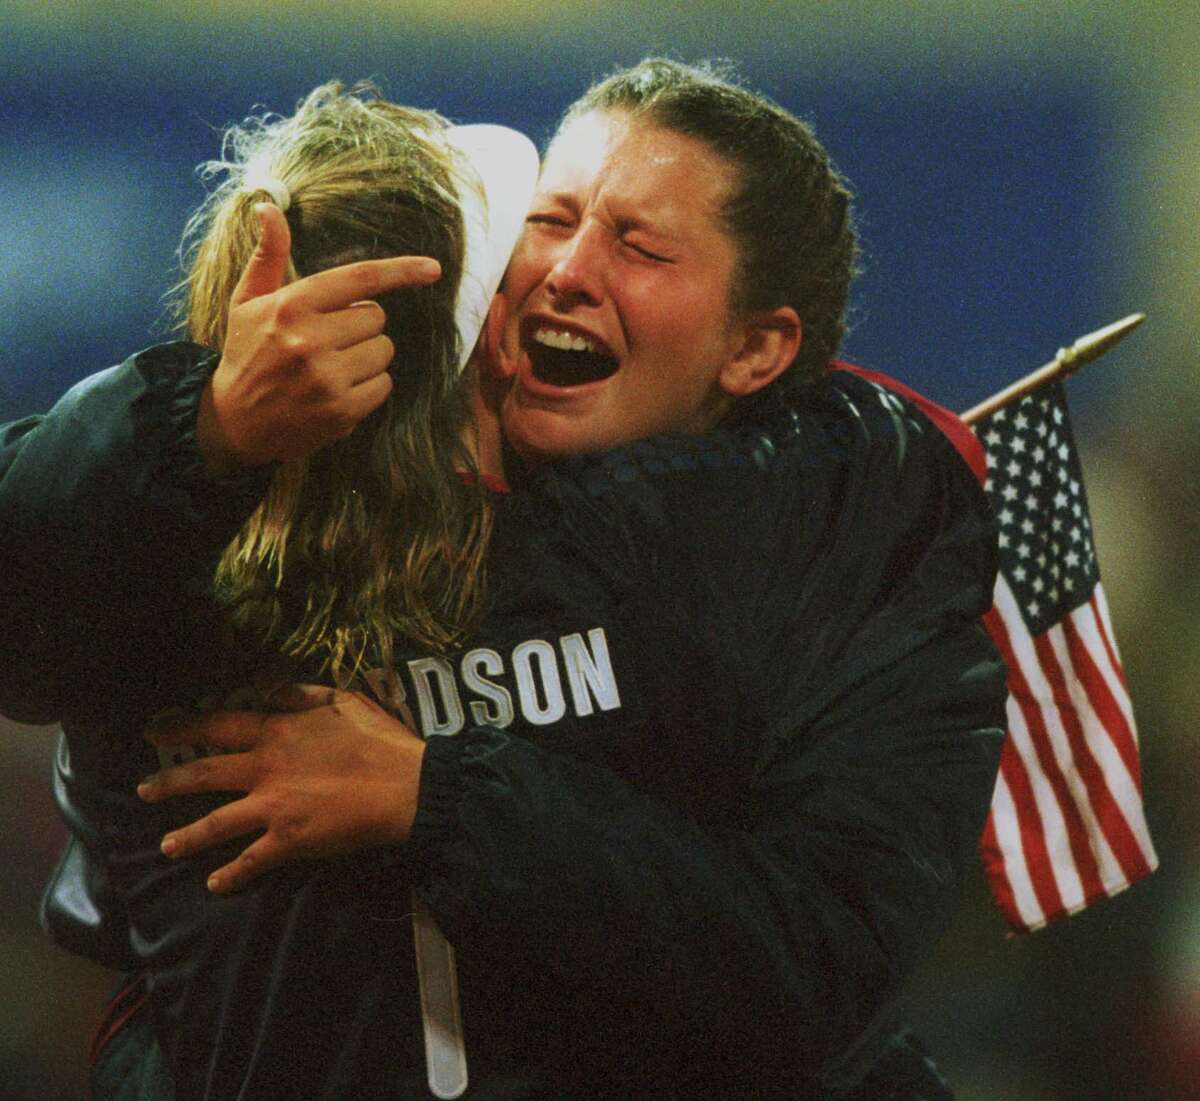 Christa Williams, hugging teammmate Dot Richardson after the US defeated Japan 2-1 in 8 innings to win the gold medal in Sydney, was nominated for the Texas Sports Hall of Fame.